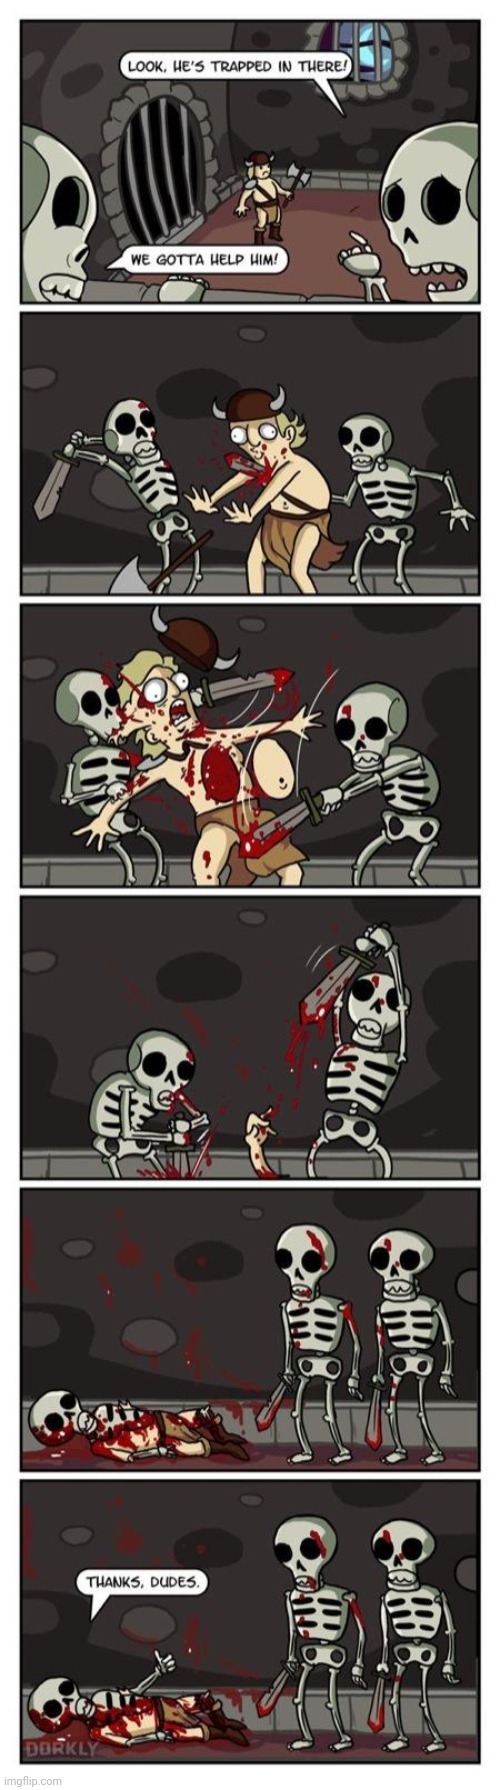 THEY SAVED HIM | image tagged in skeletons,comics/cartoons | made w/ Imgflip meme maker